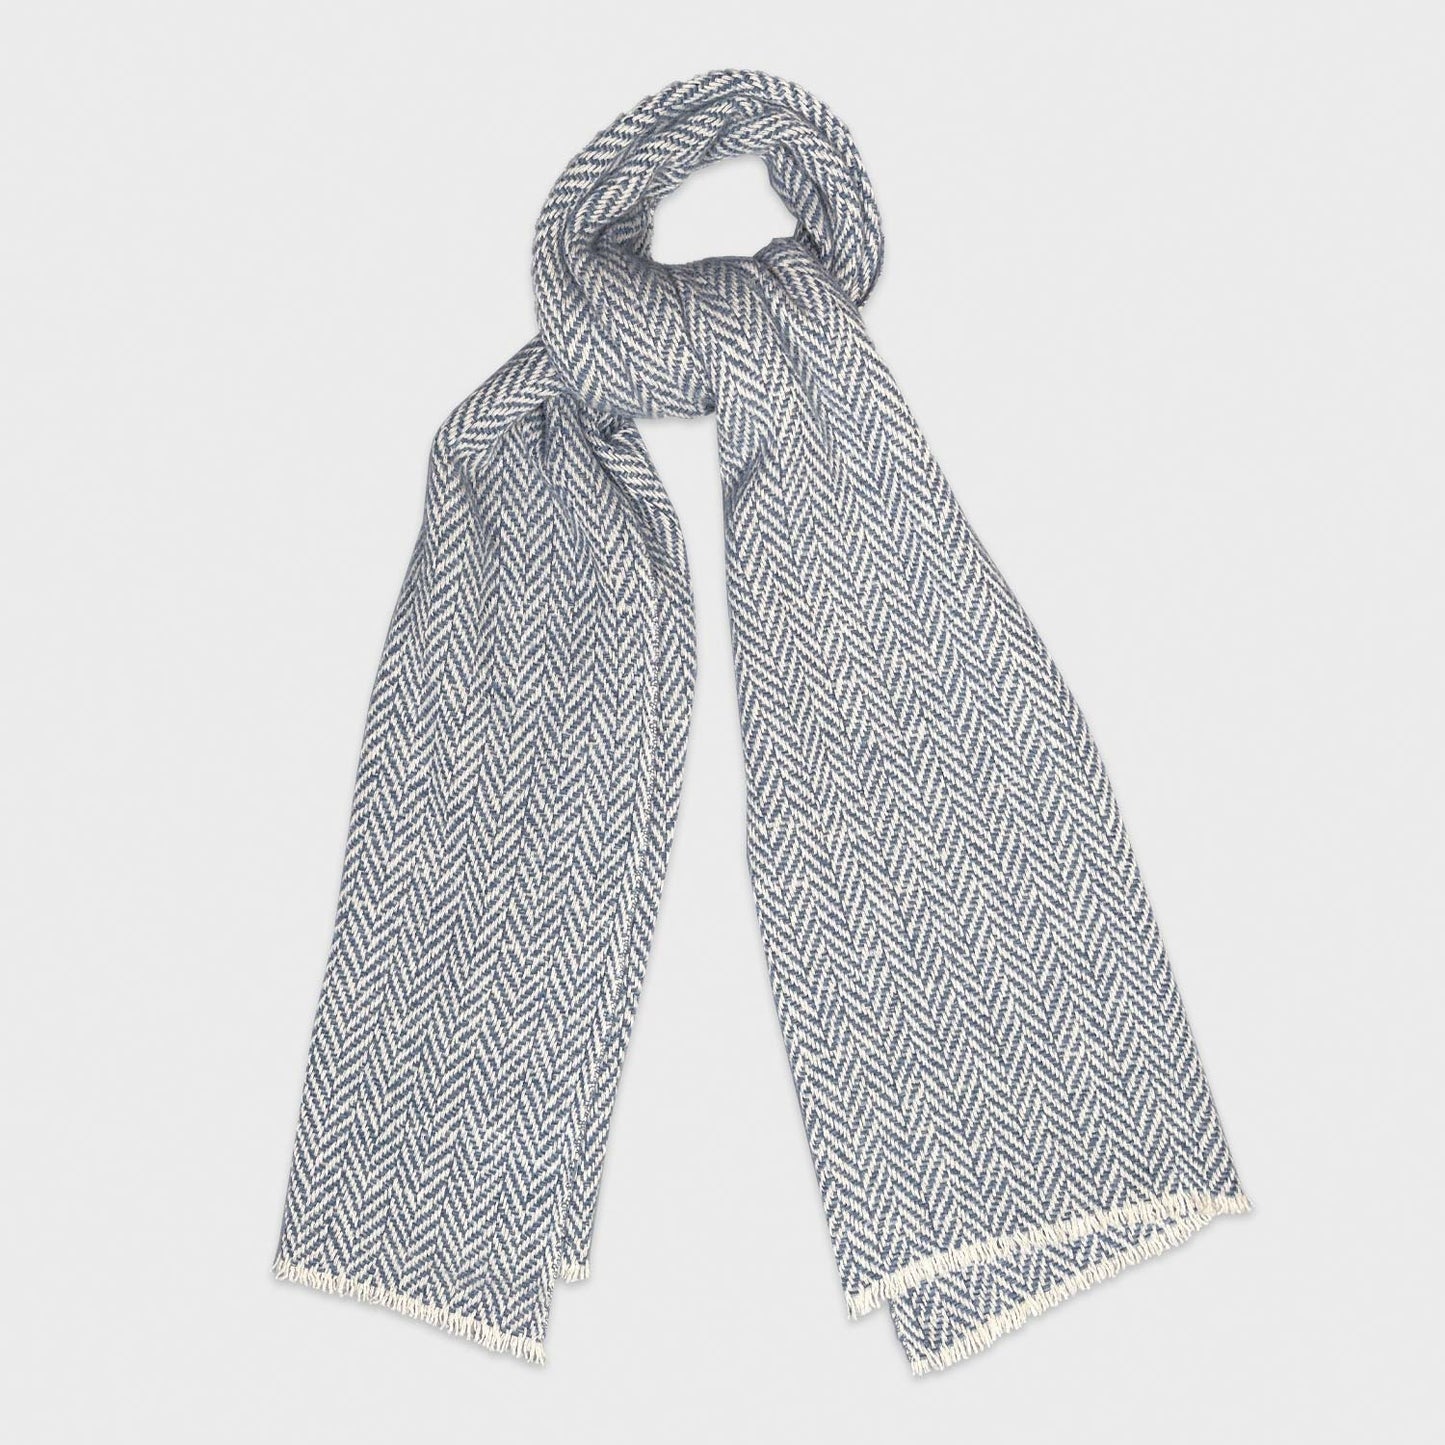 Denim Blue Herringbone Cashmere Scarf 19 andrea's 47. Soft cashmere shawl, iconic herringbone scarf ideal as a unisex scarf or cashmere shrug, made in Italy by 19 Andrea's 47 for Wools Boutique Uomo, denim blue and ivory white color